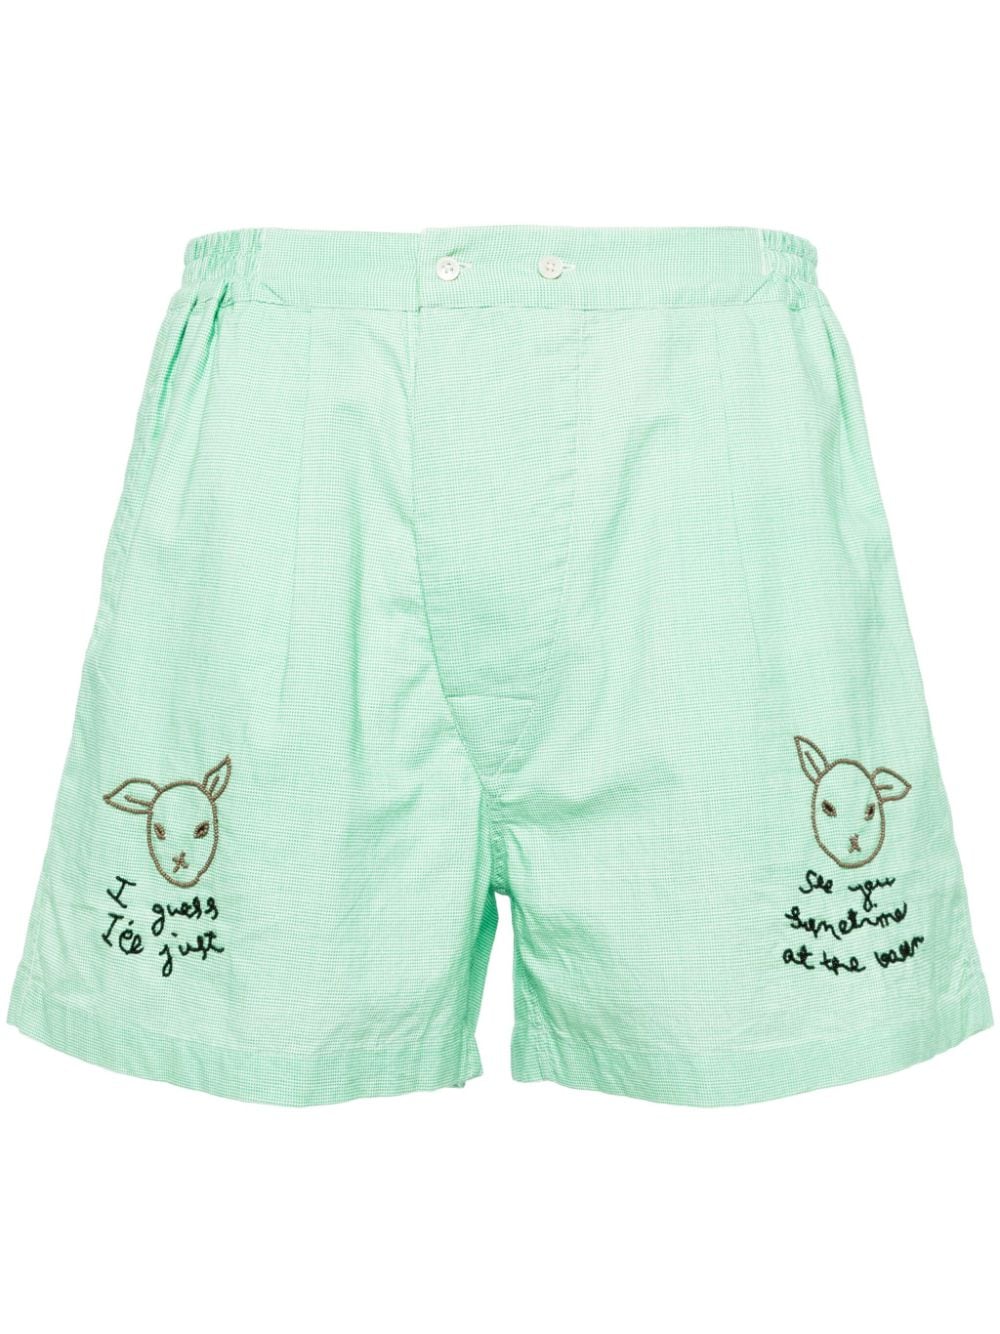 BODE See You At The Barn cotton shorts - Green von BODE